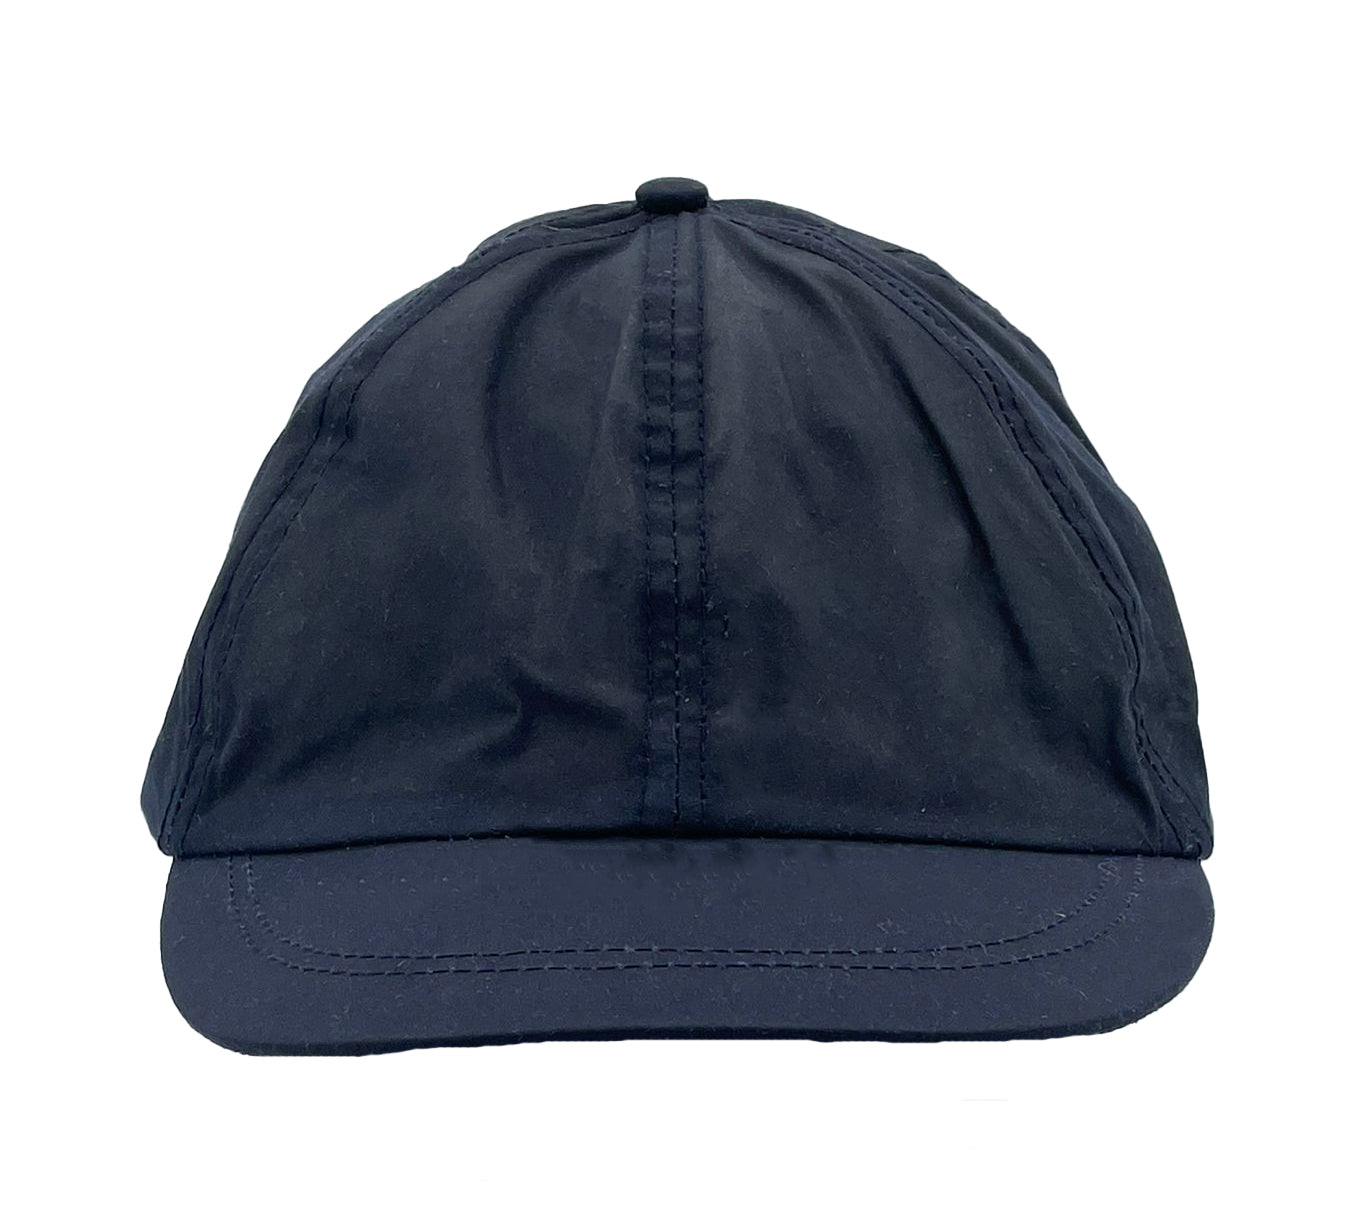 Ultra -light slide hat with elastic band | Men's cappi made of water-repellent cotton